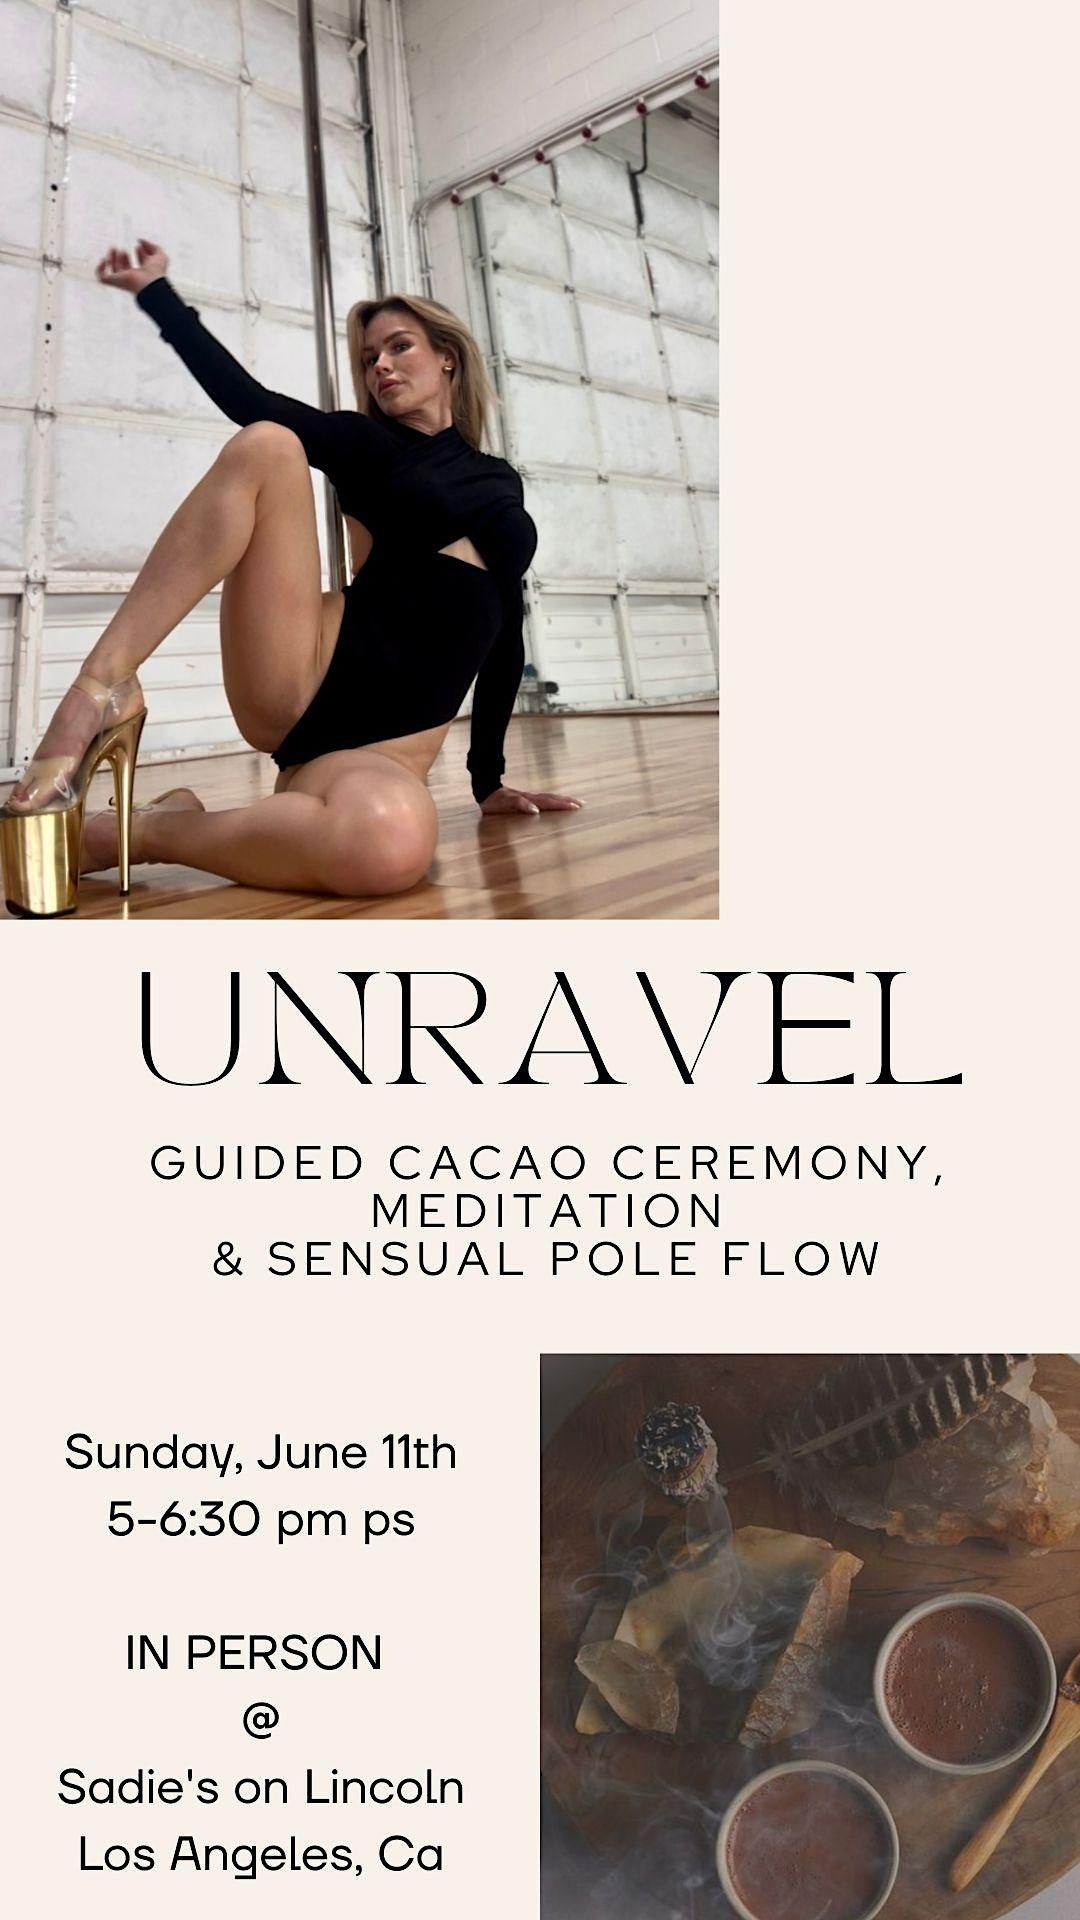 IN-PERSON! UNRAVEL | Guided Cacao Ceremony & Sensual Pole Flow